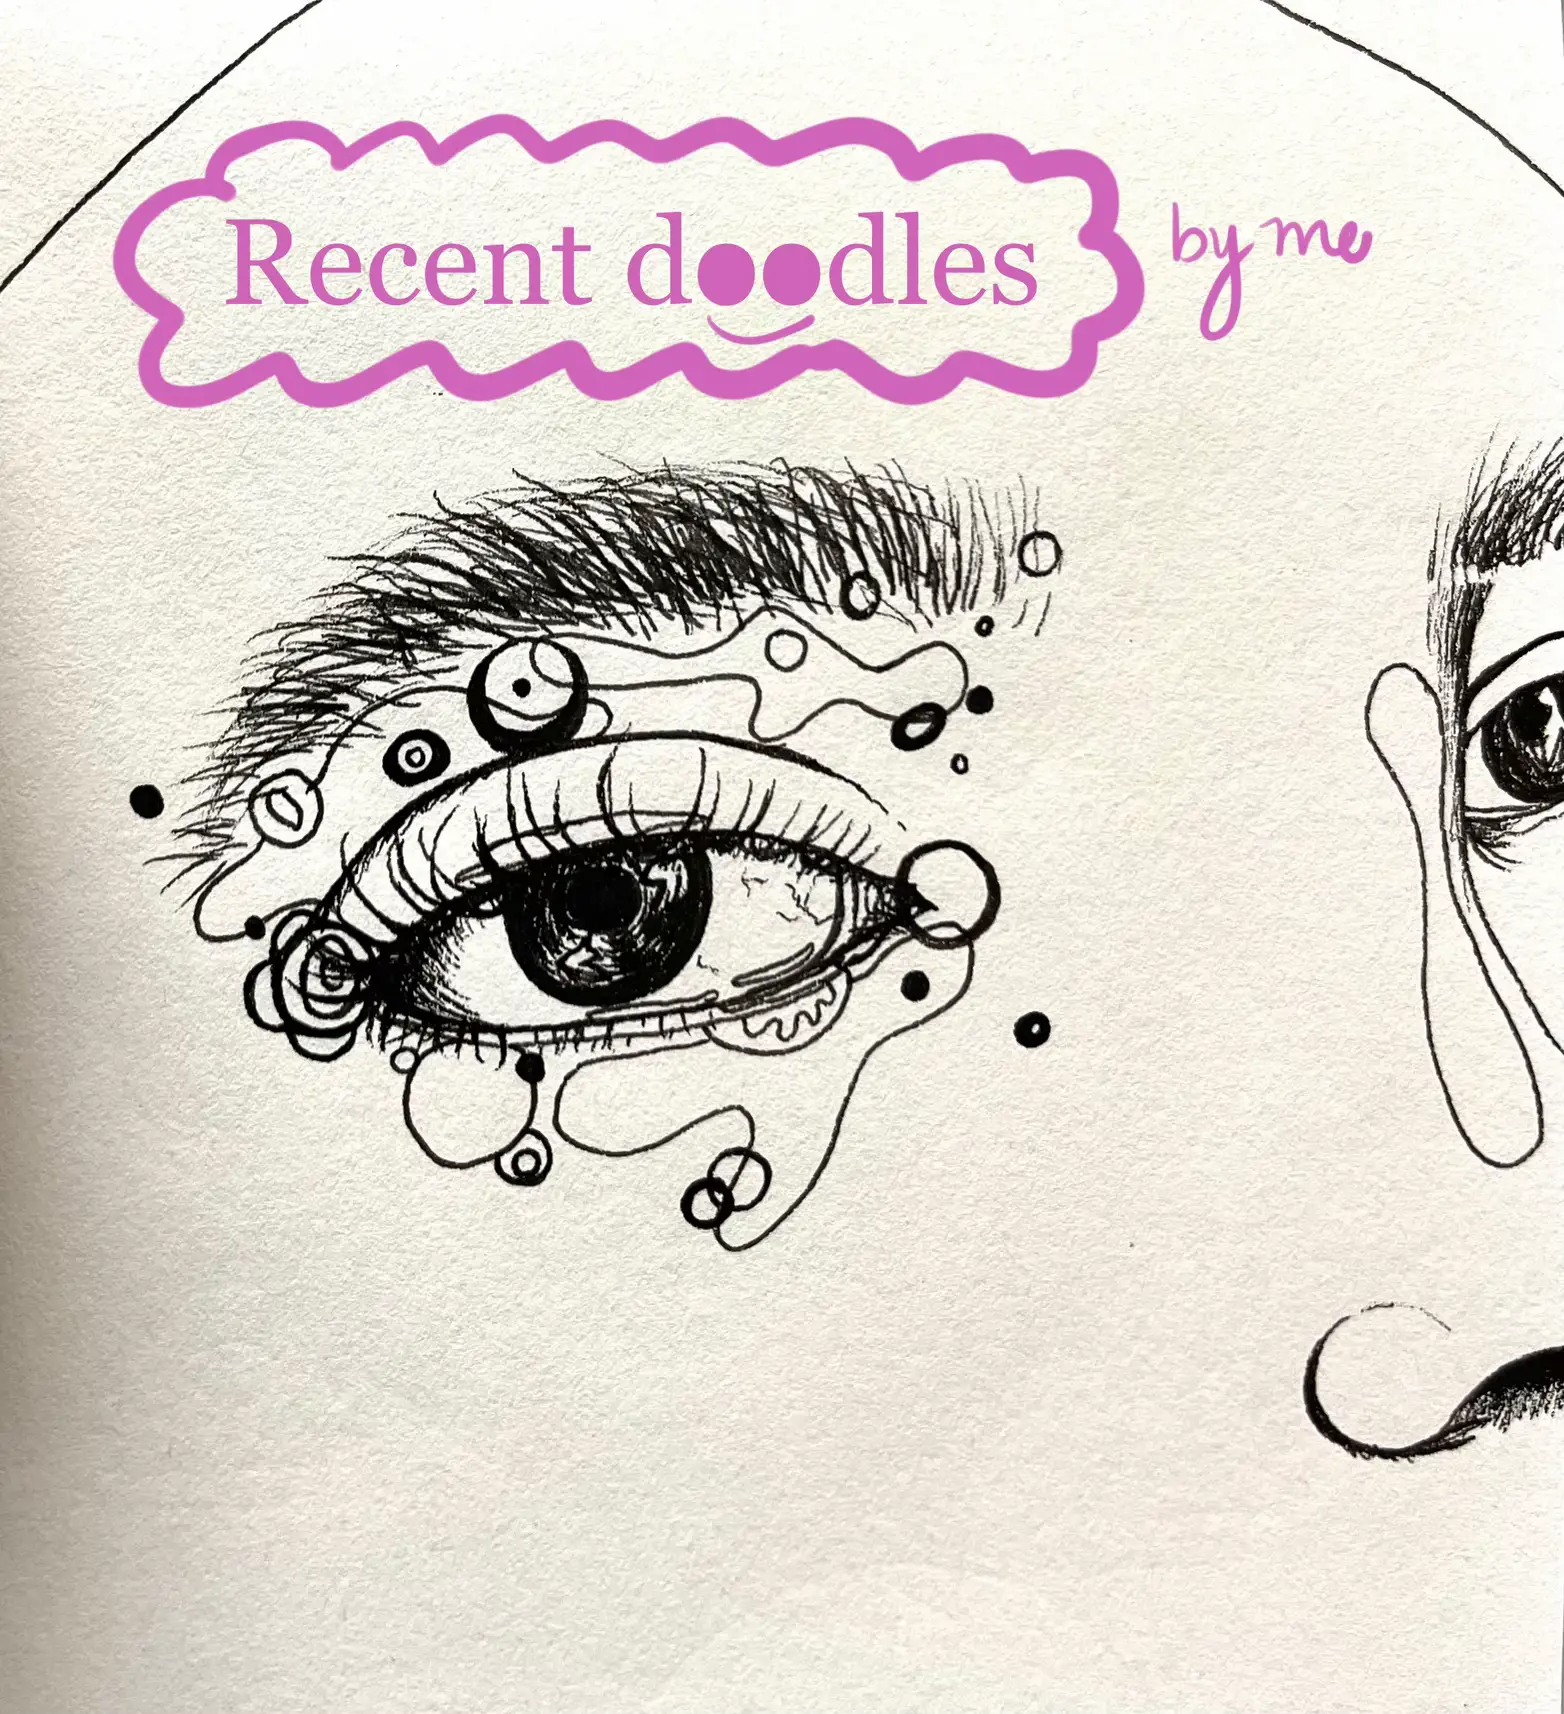 I've been trying to doodle more in my journal! Drawing with a pen